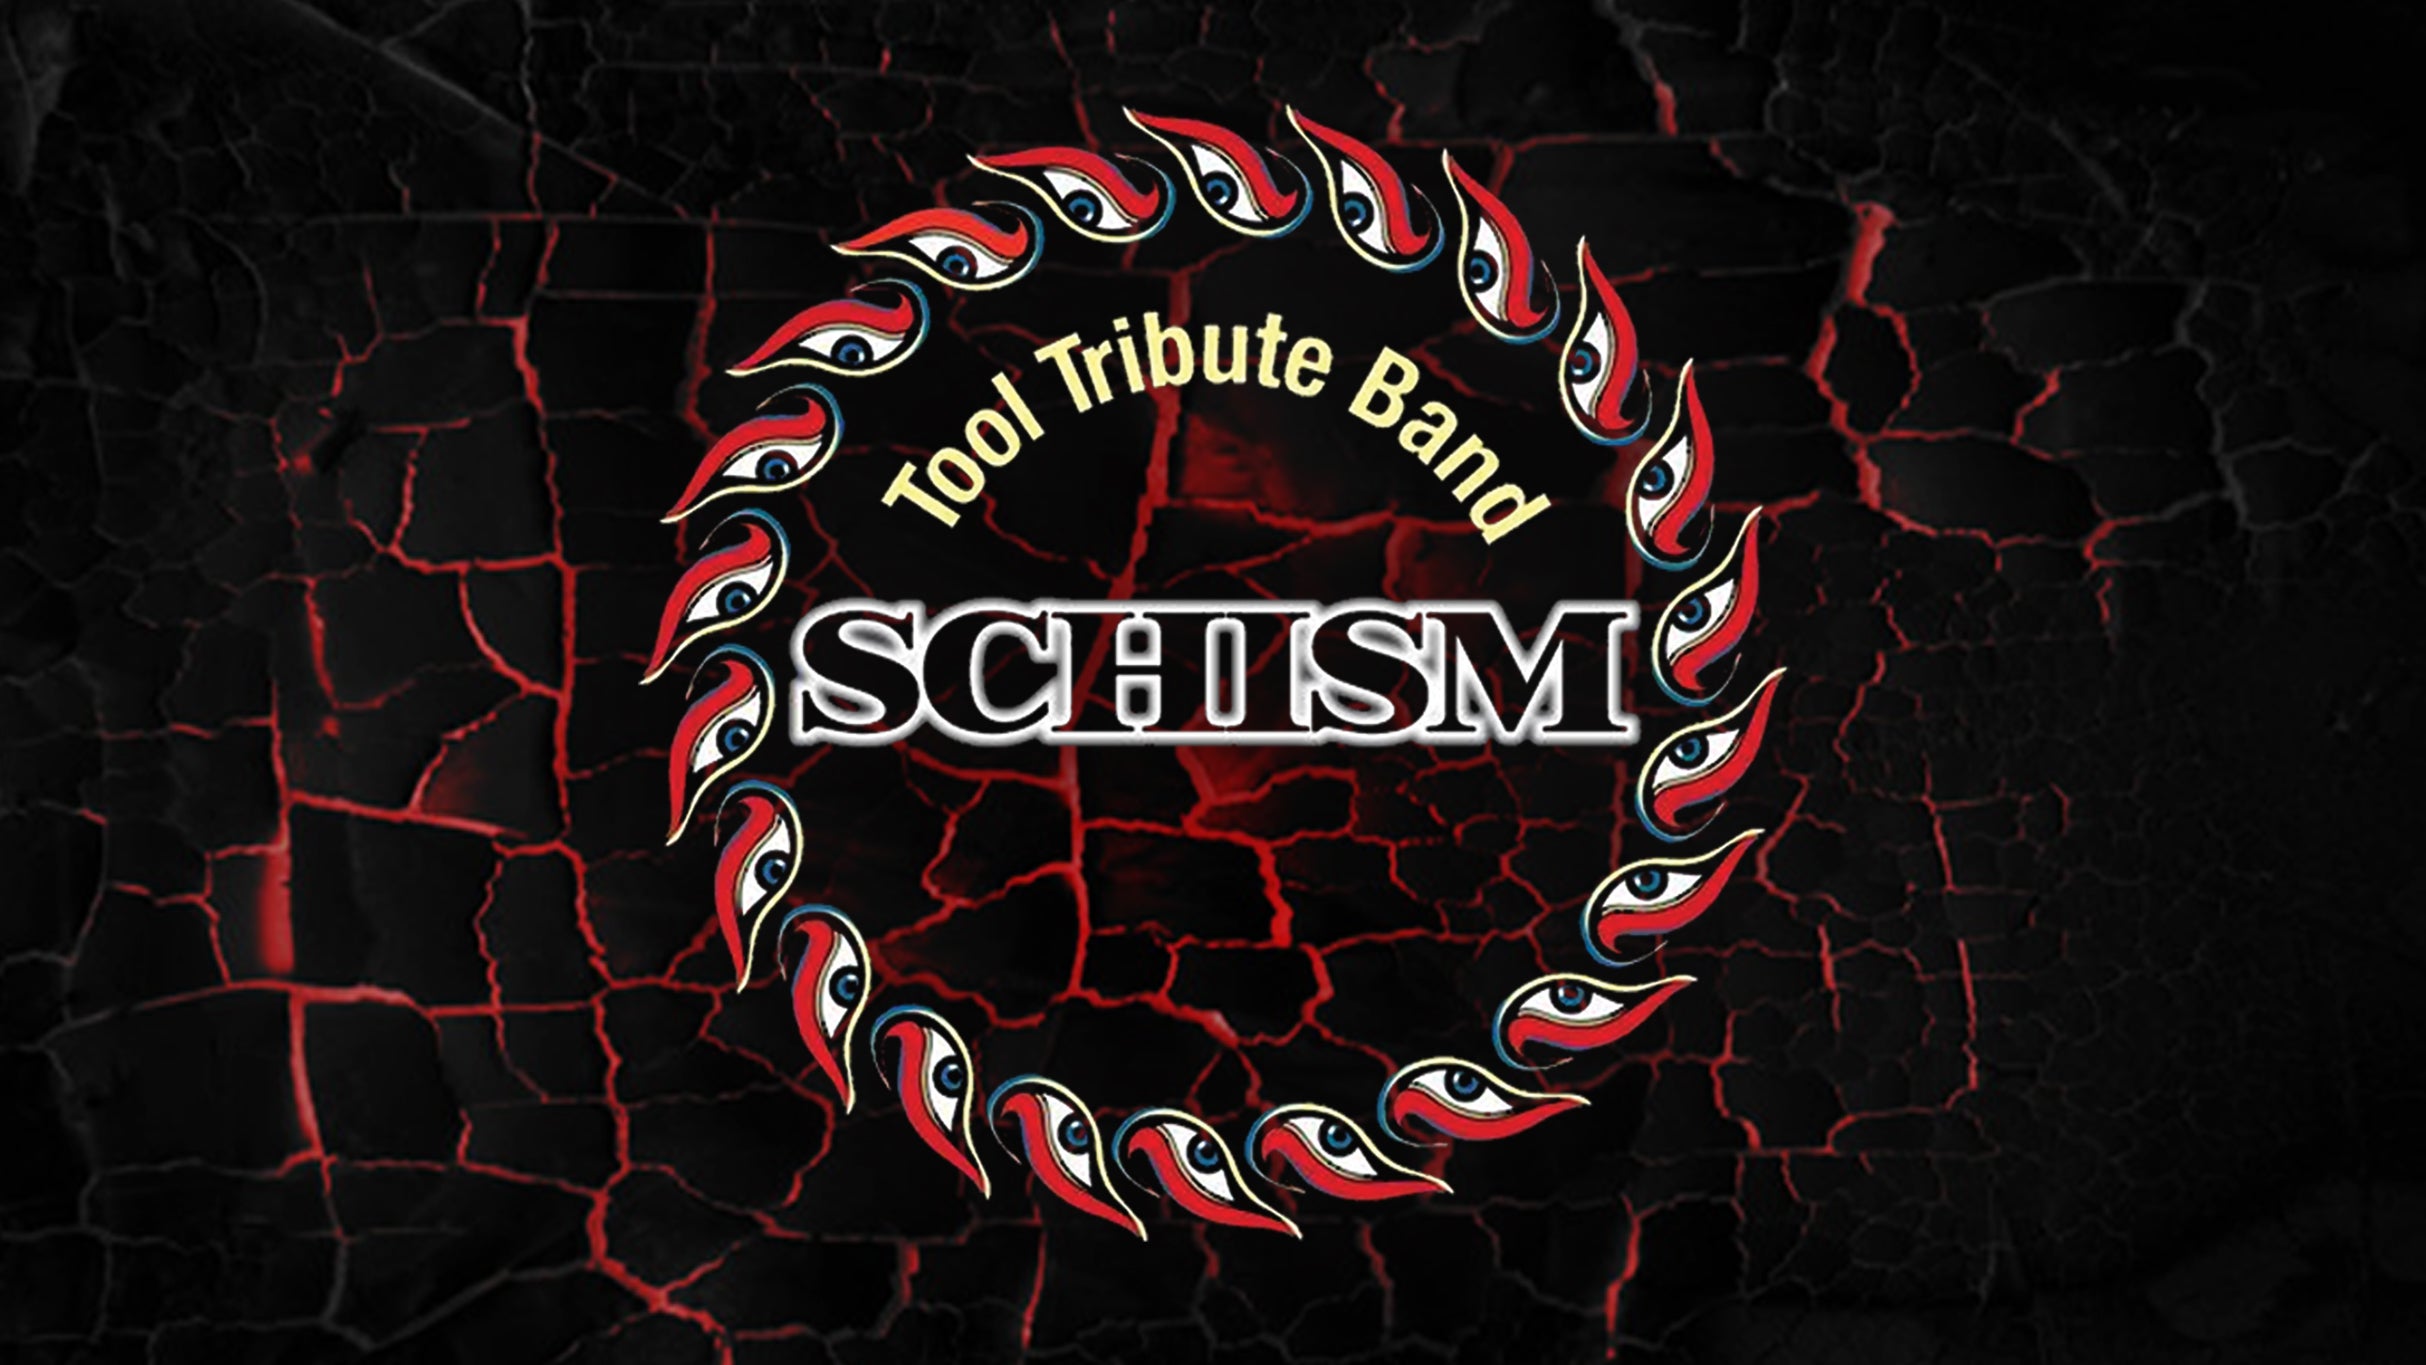 Schism (A Tribute To Tool), Xhilerate, Naildriver